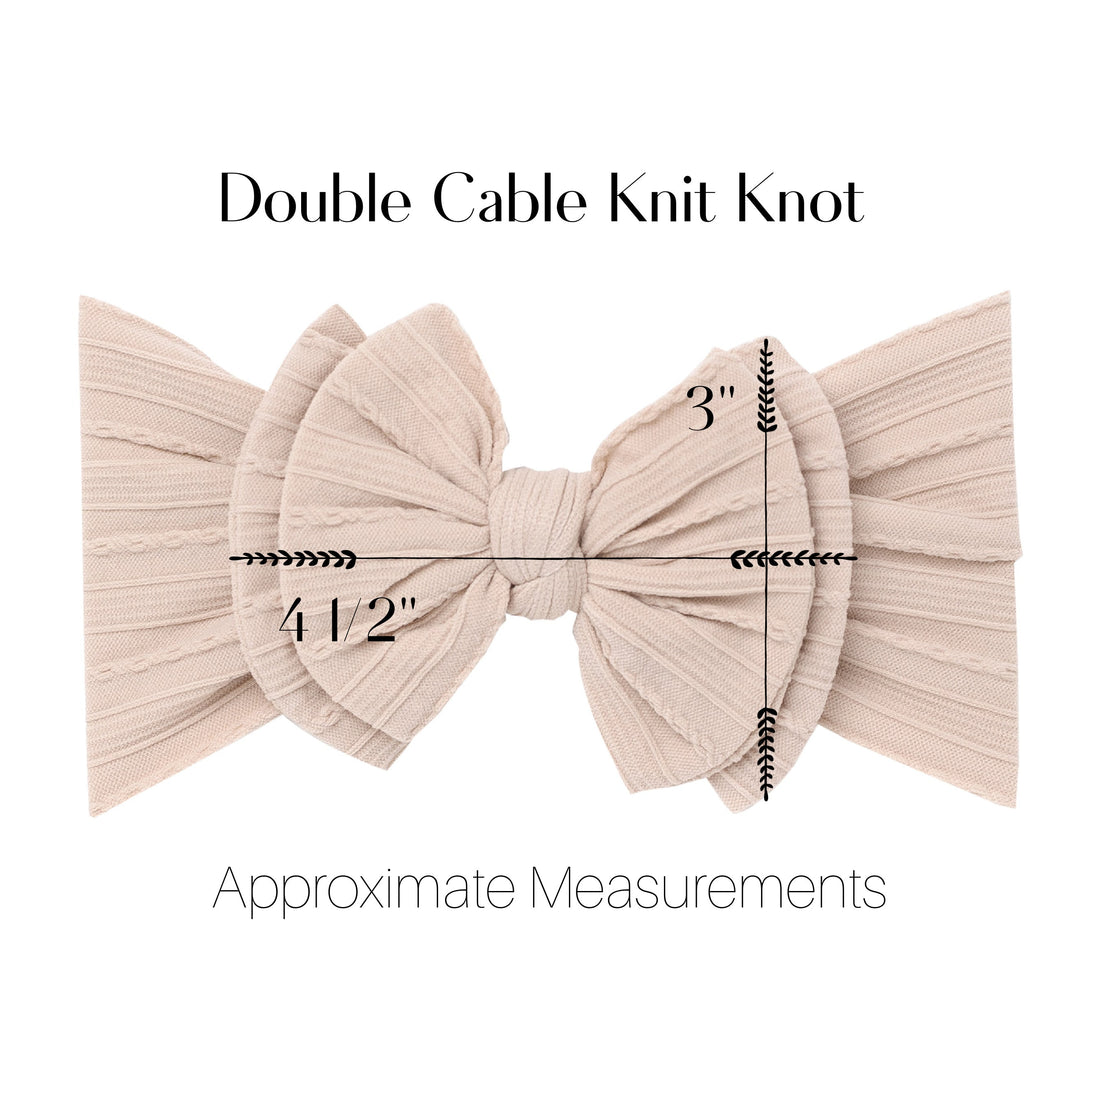 Double Cable Knit Knot - Red